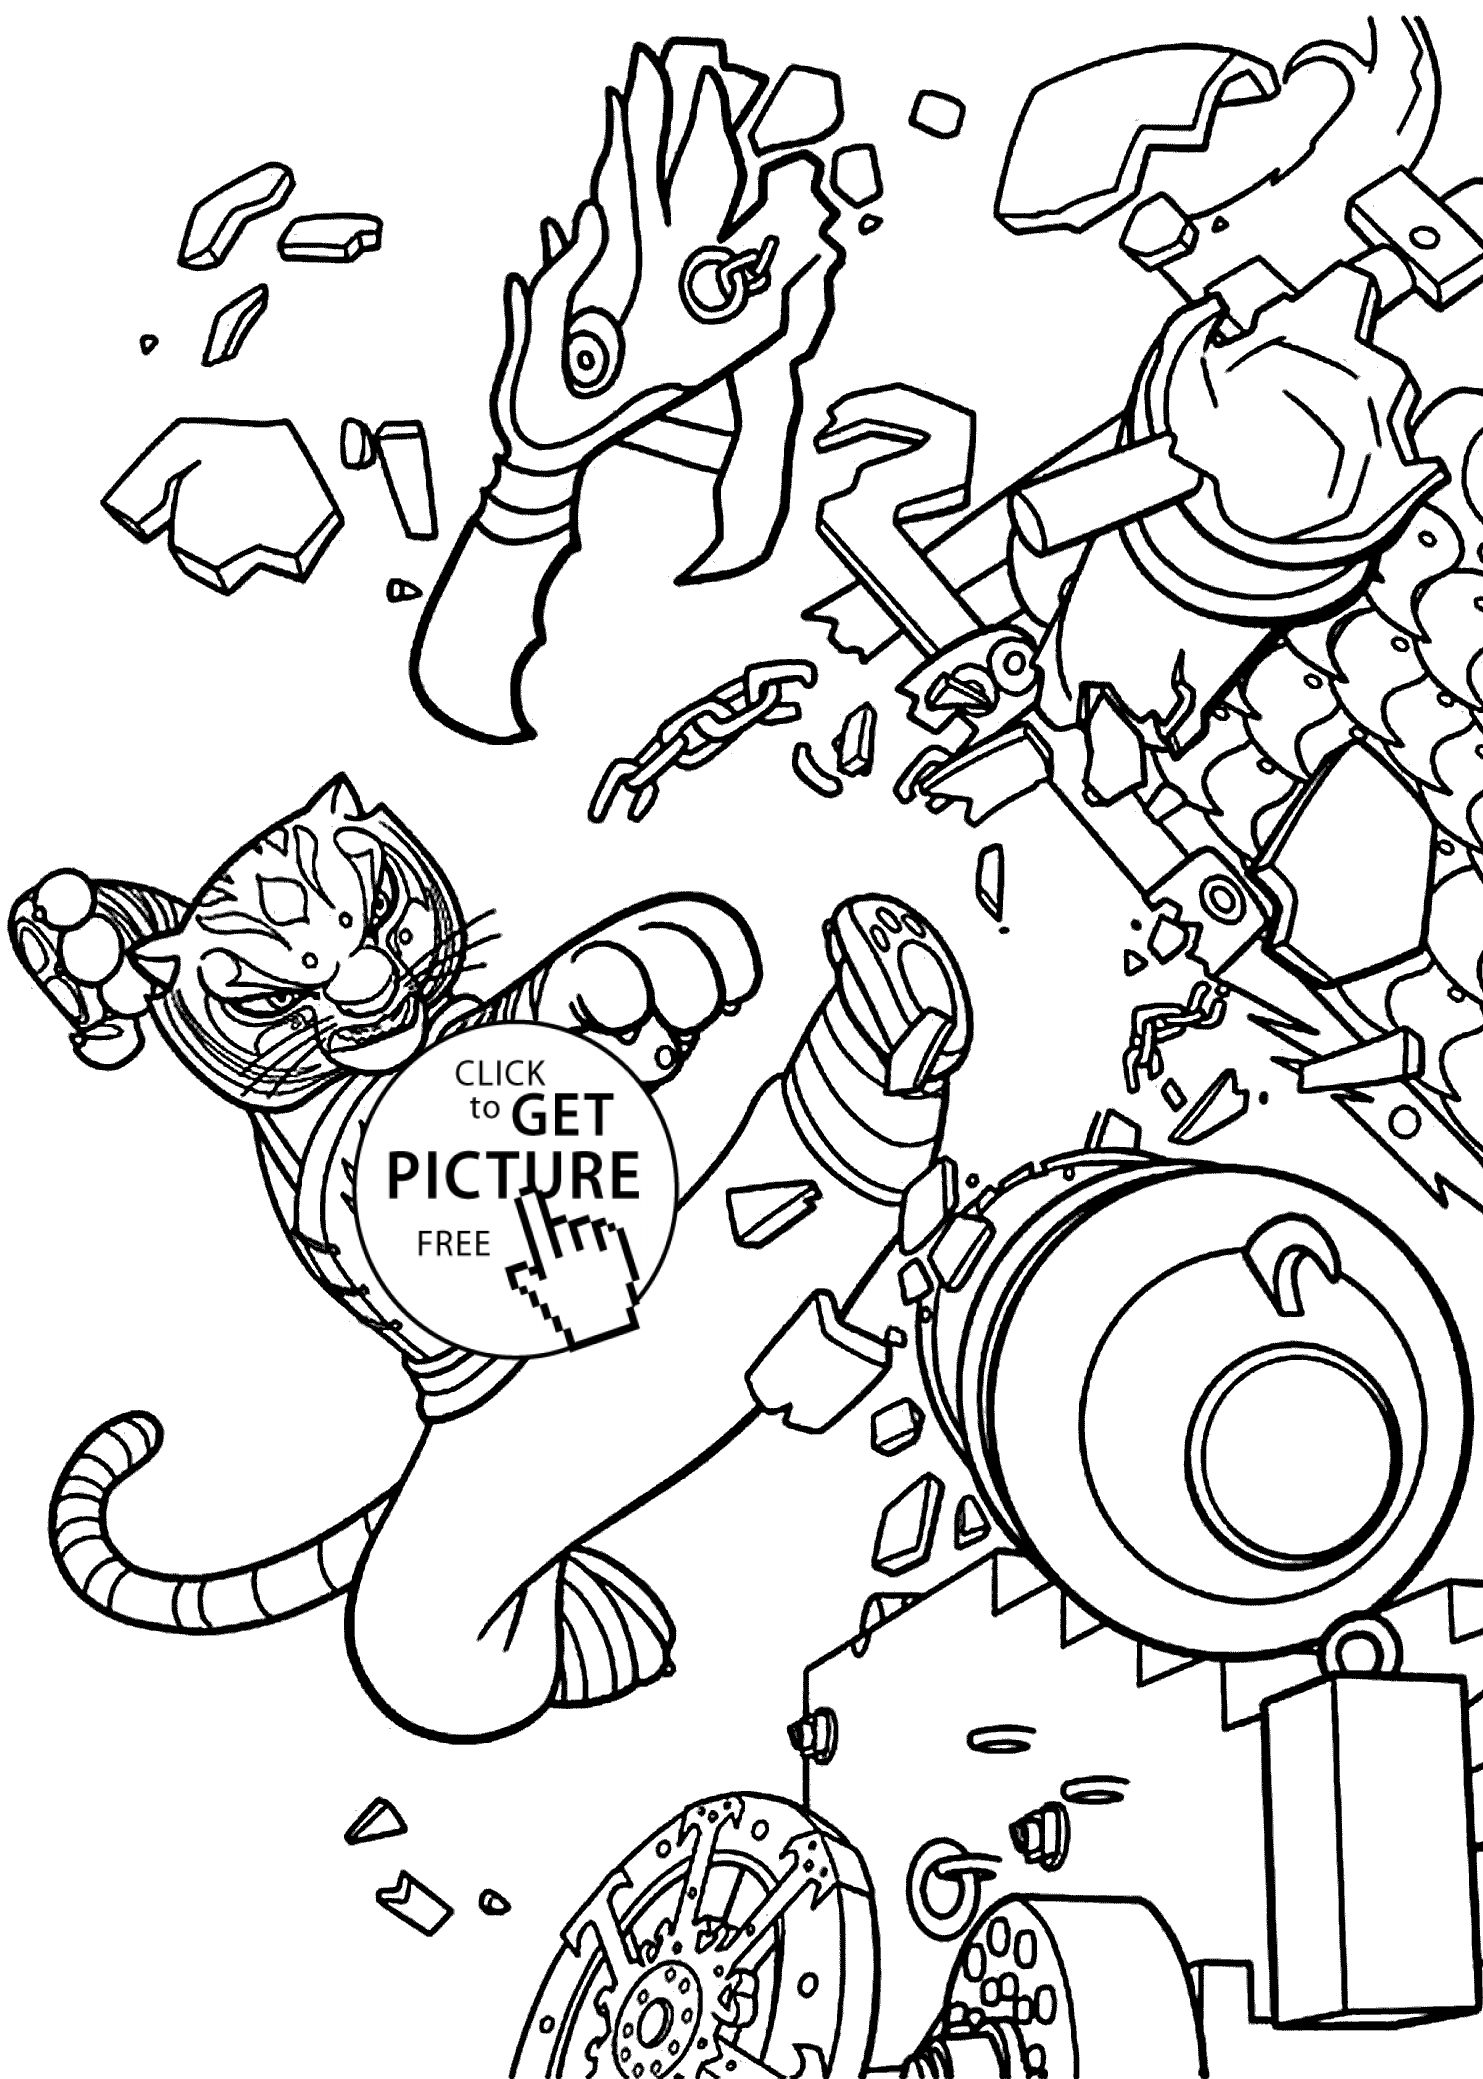 Download Master Tigress From Kung Fu Panda Coloring Pages For Kids, Printable Free | Coloing-4kids.com ...